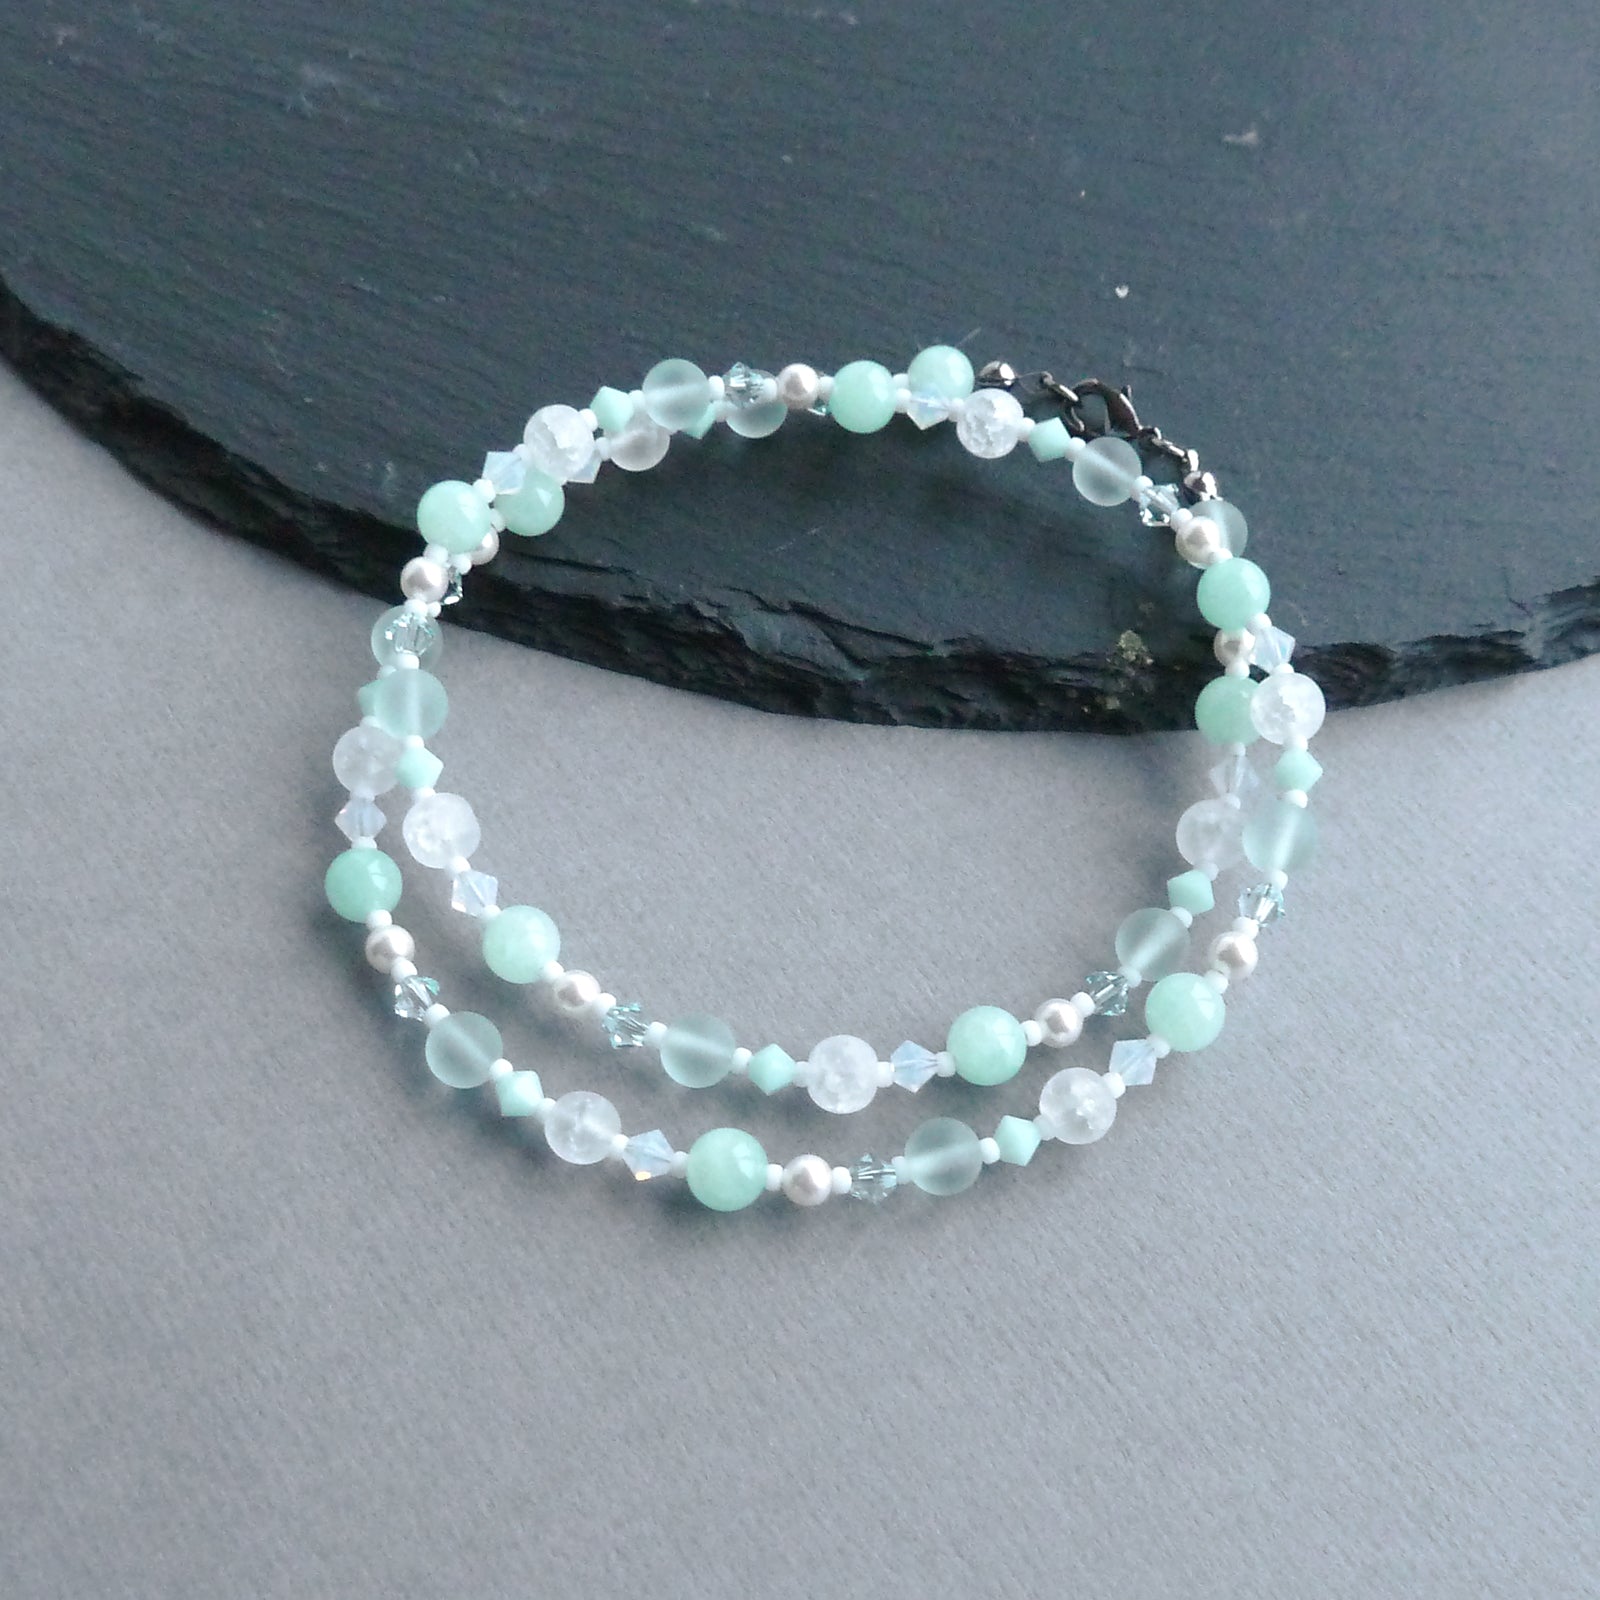 Mint green beaded necklace